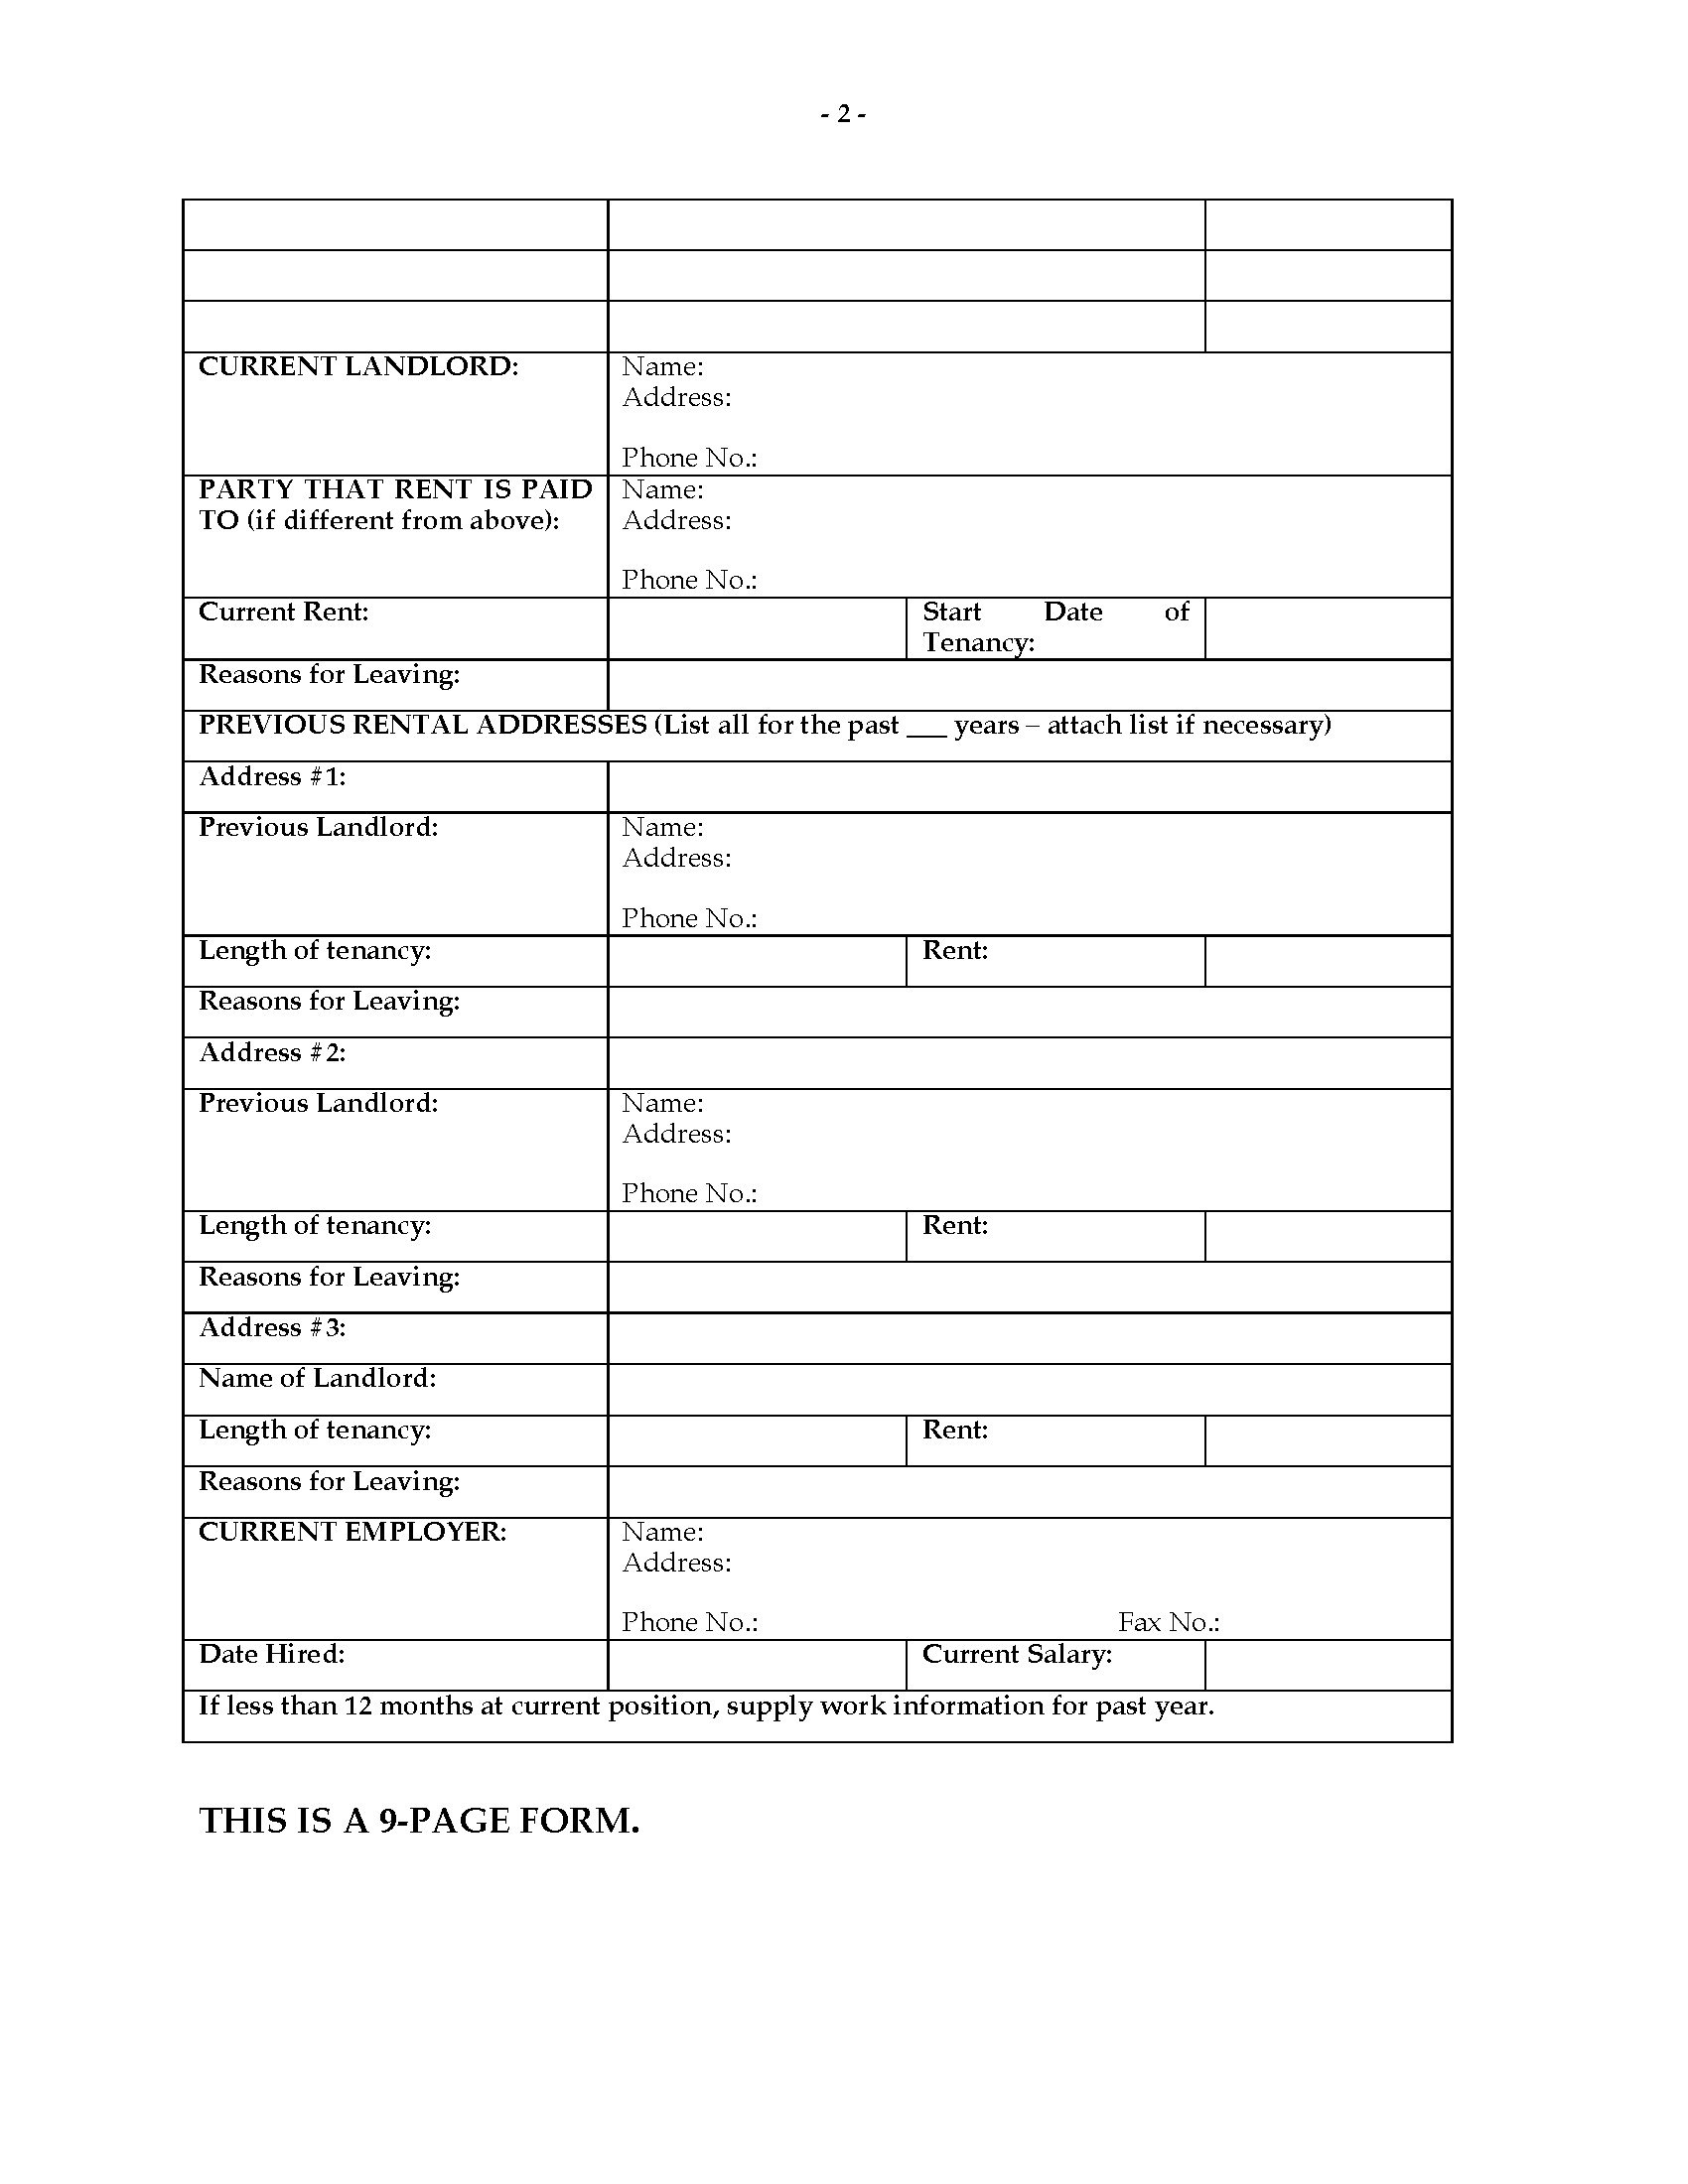 indiana-rental-application-form-legal-forms-and-business-templates